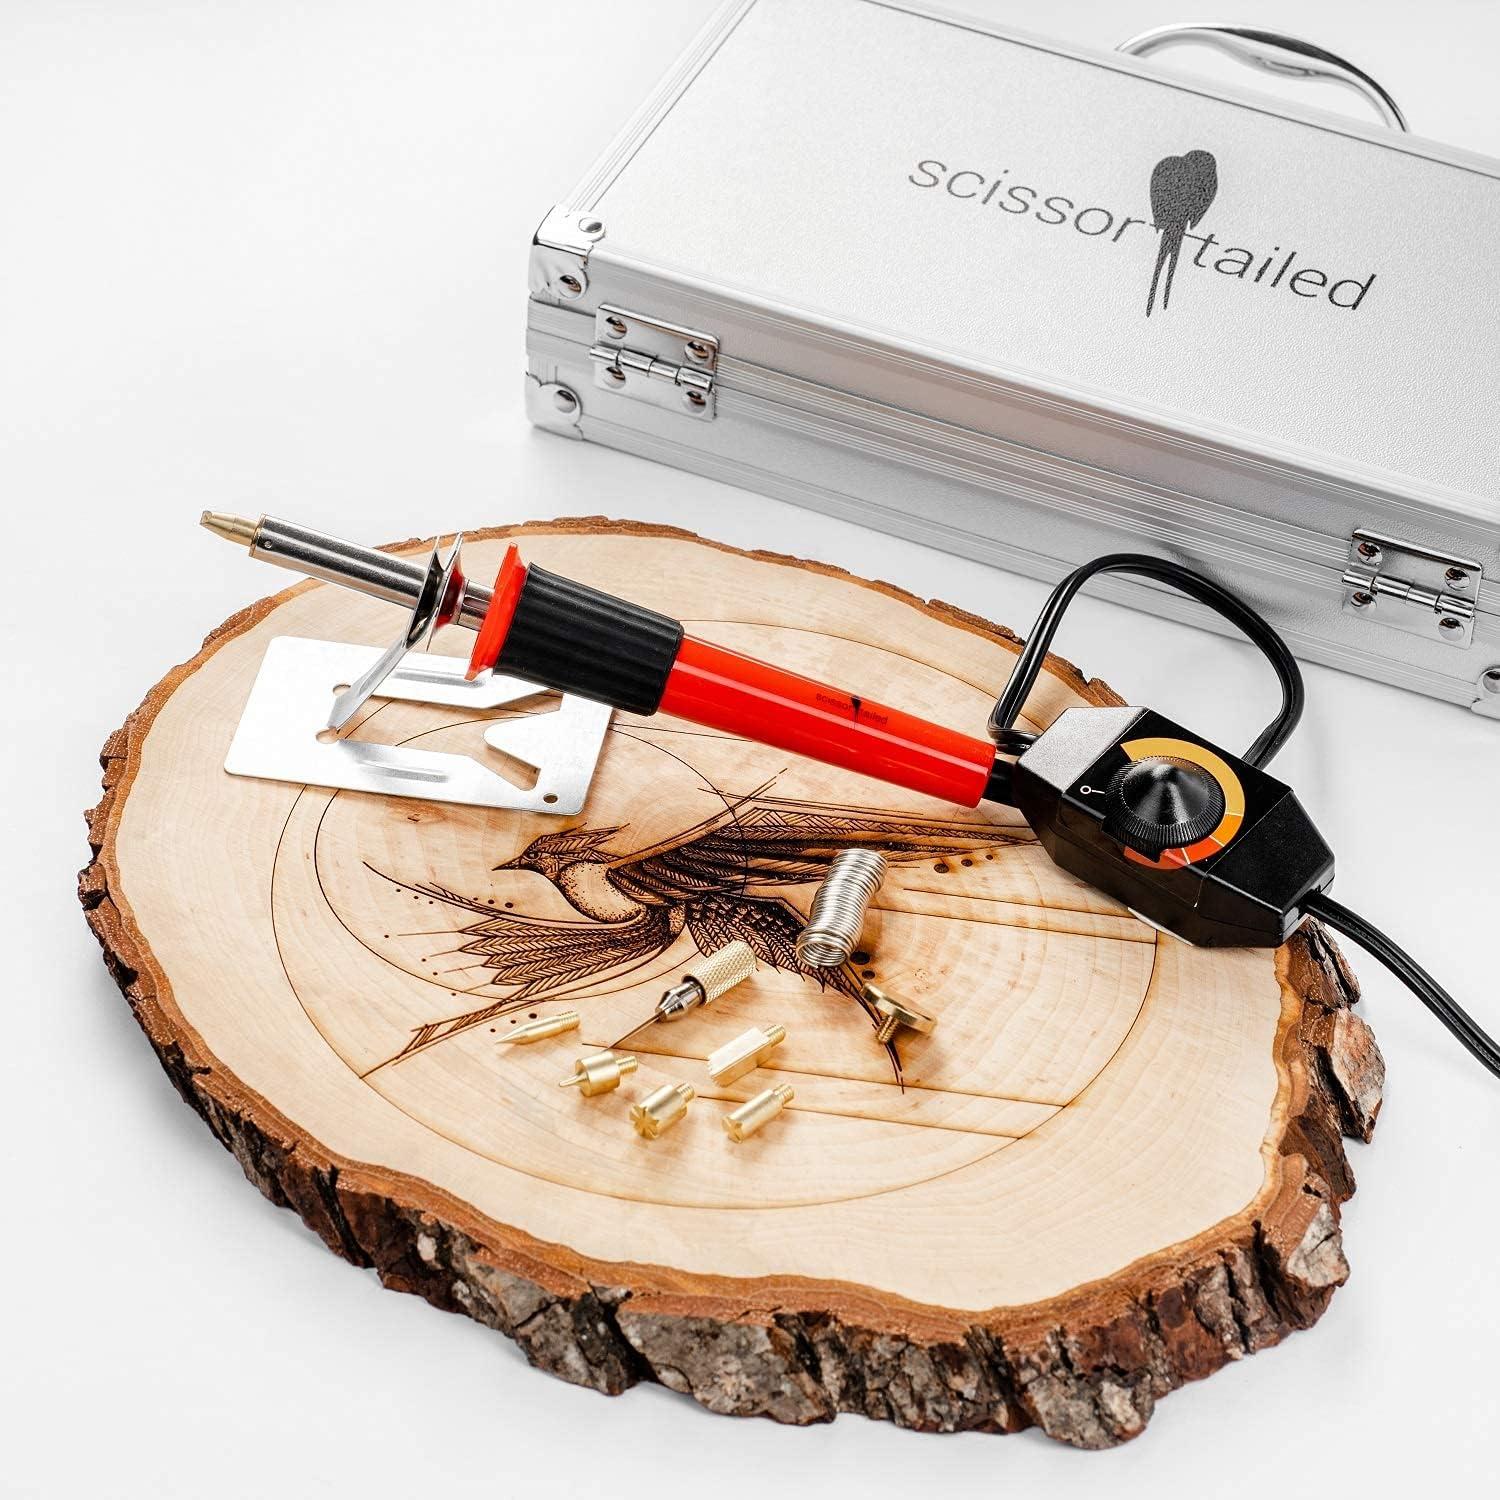  Wood Burning Kit or Wood Burning Tool - Professional Grade High  Adjustable Temperature (1500 F) with Two Wood Burning Pen Pyrography Wood  Burning Kit : Arts, Crafts & Sewing